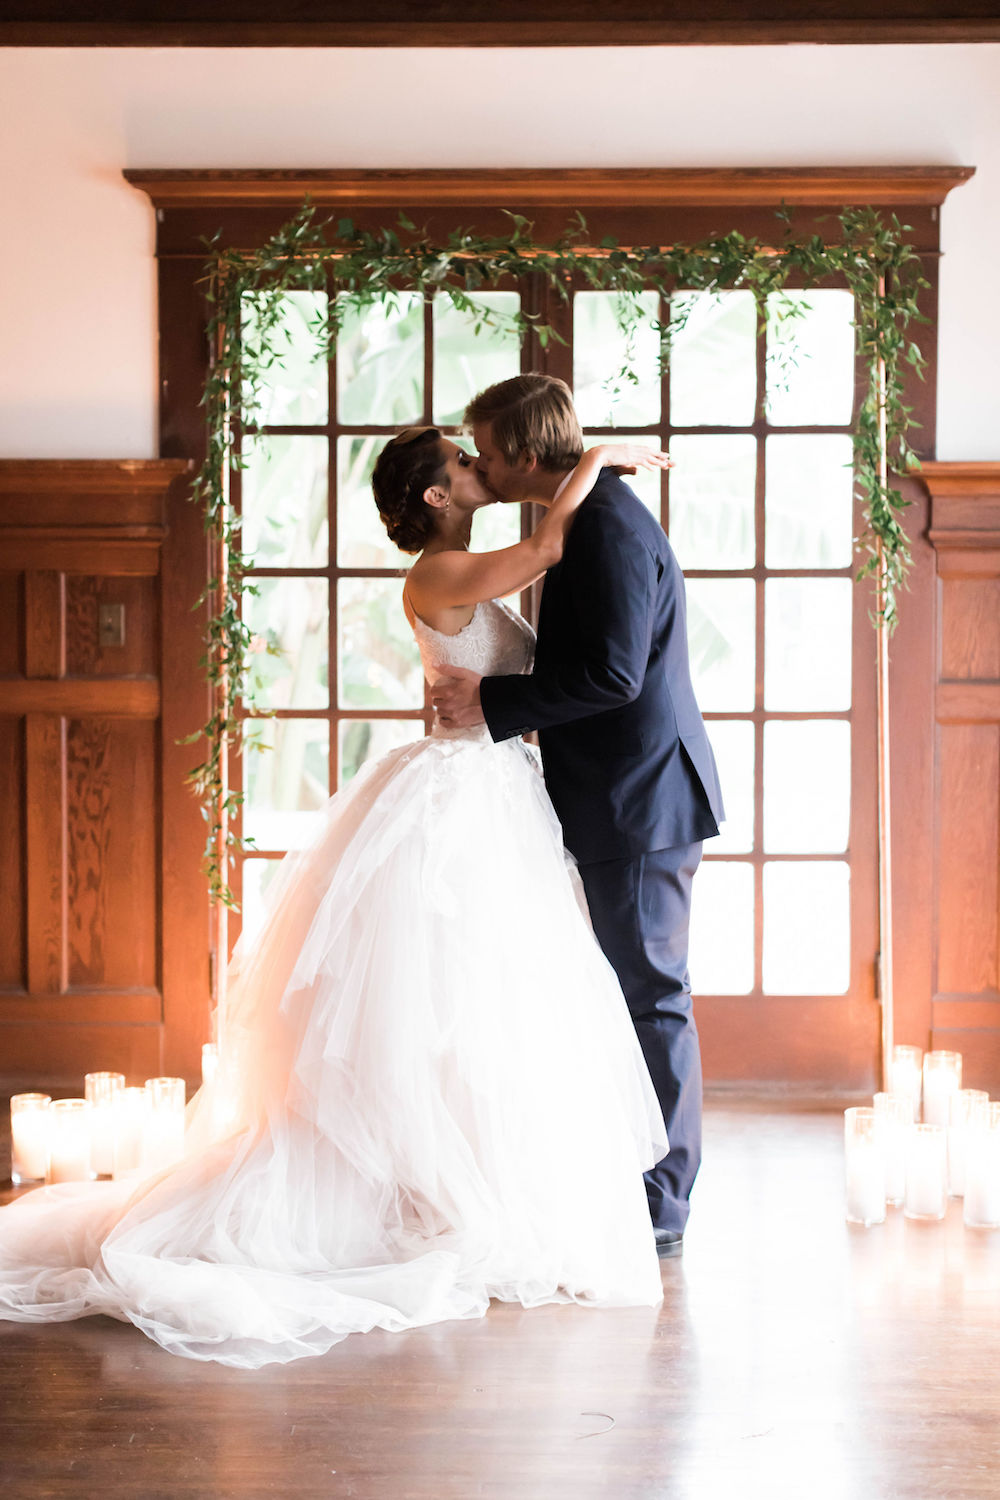 The Most Stunning and Ethereal Wedding Ideas For Your Big Day